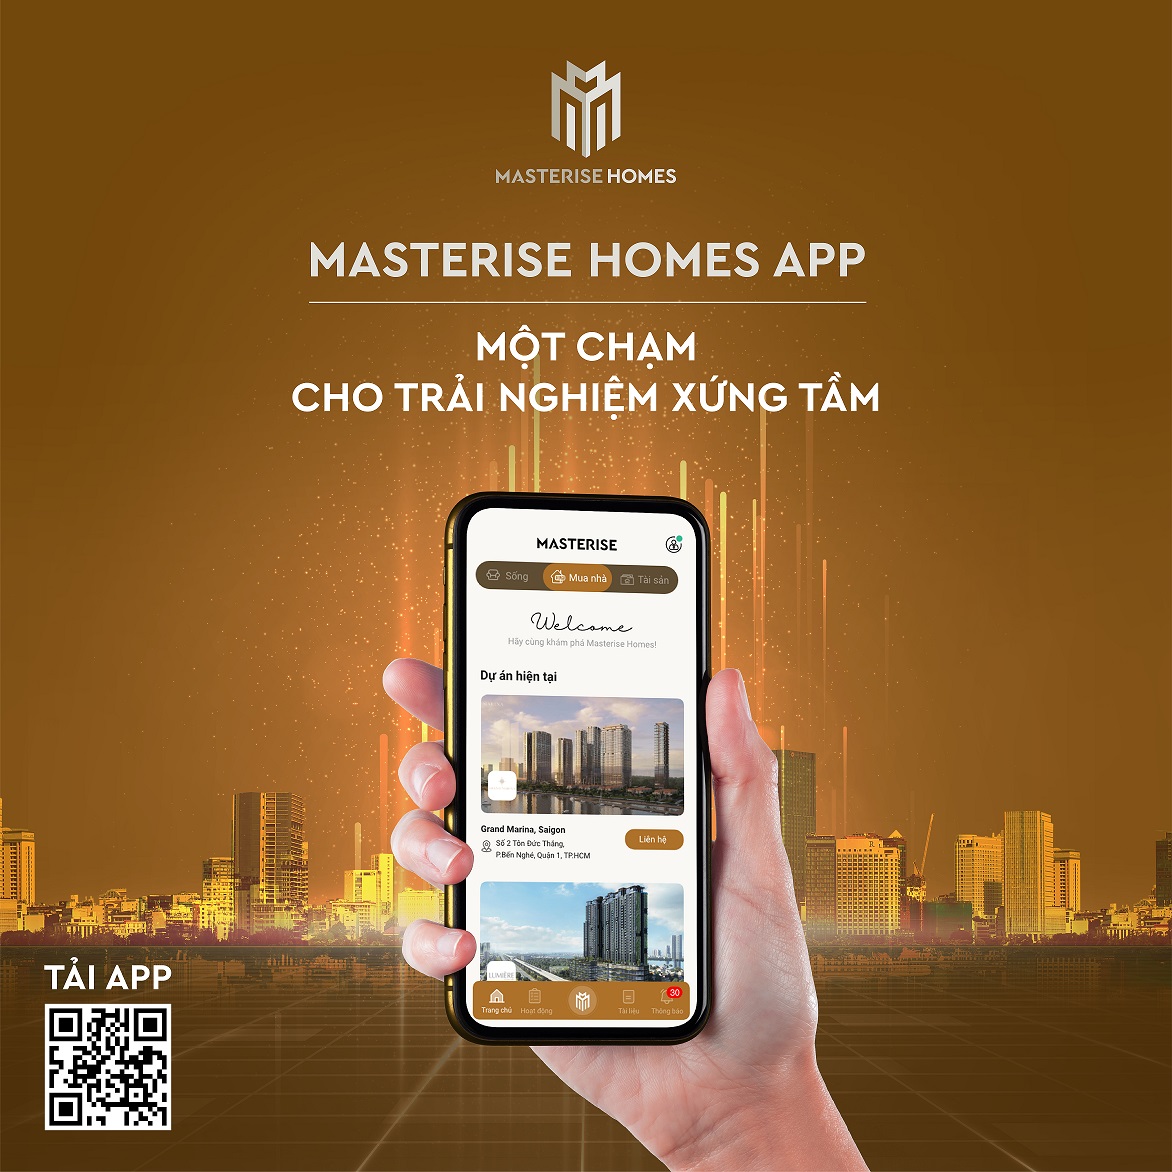 Masterise Homes launches a smart app that changes the way purchasers buy their new homes.